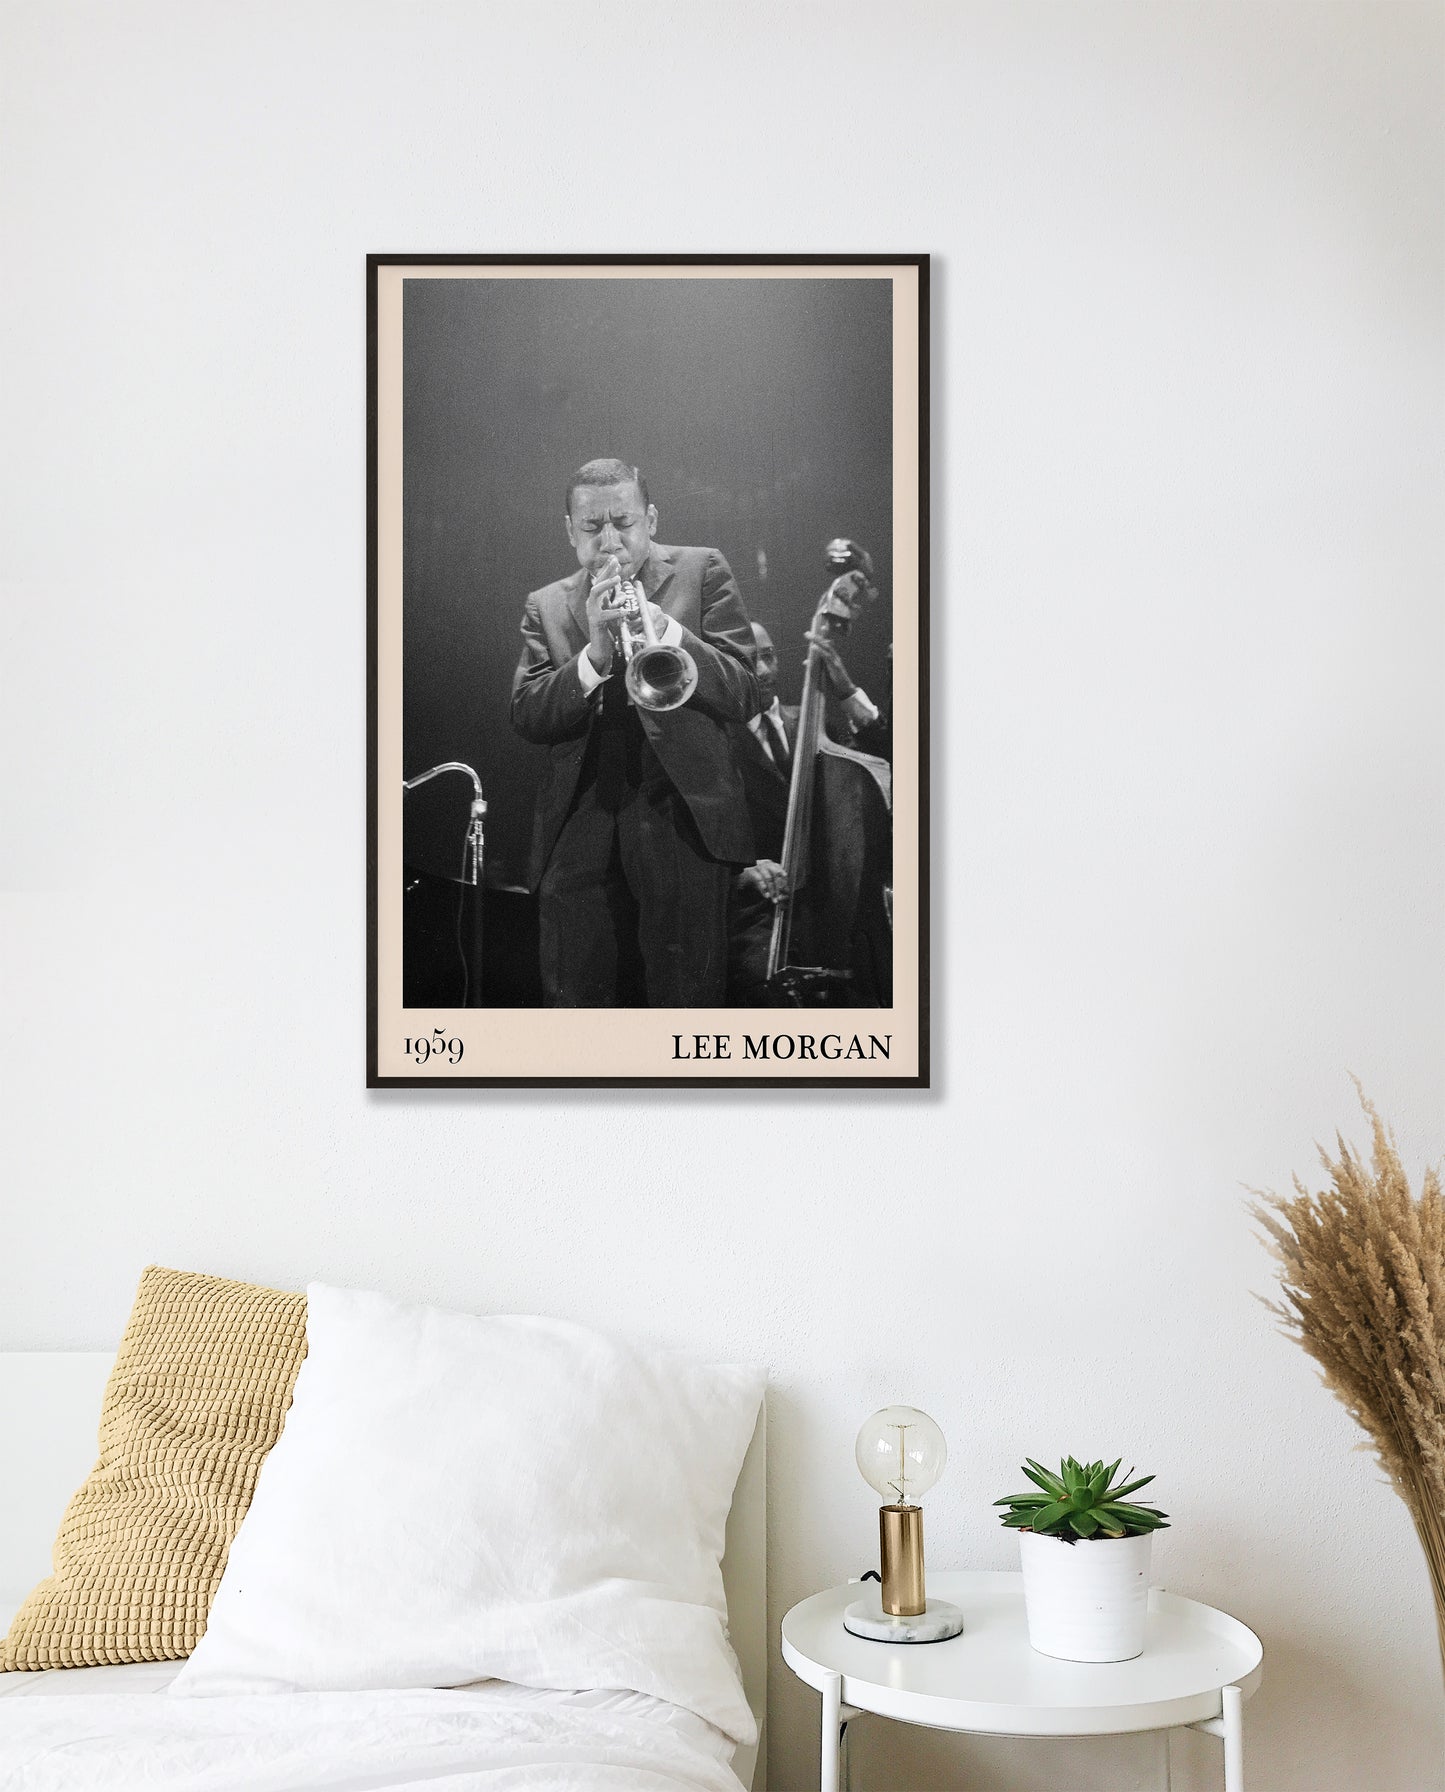 1959 photograph of Lee Morgan playing the Trumpet transformed into a stylish black-framed retro poster hanging on a white bedroom wall